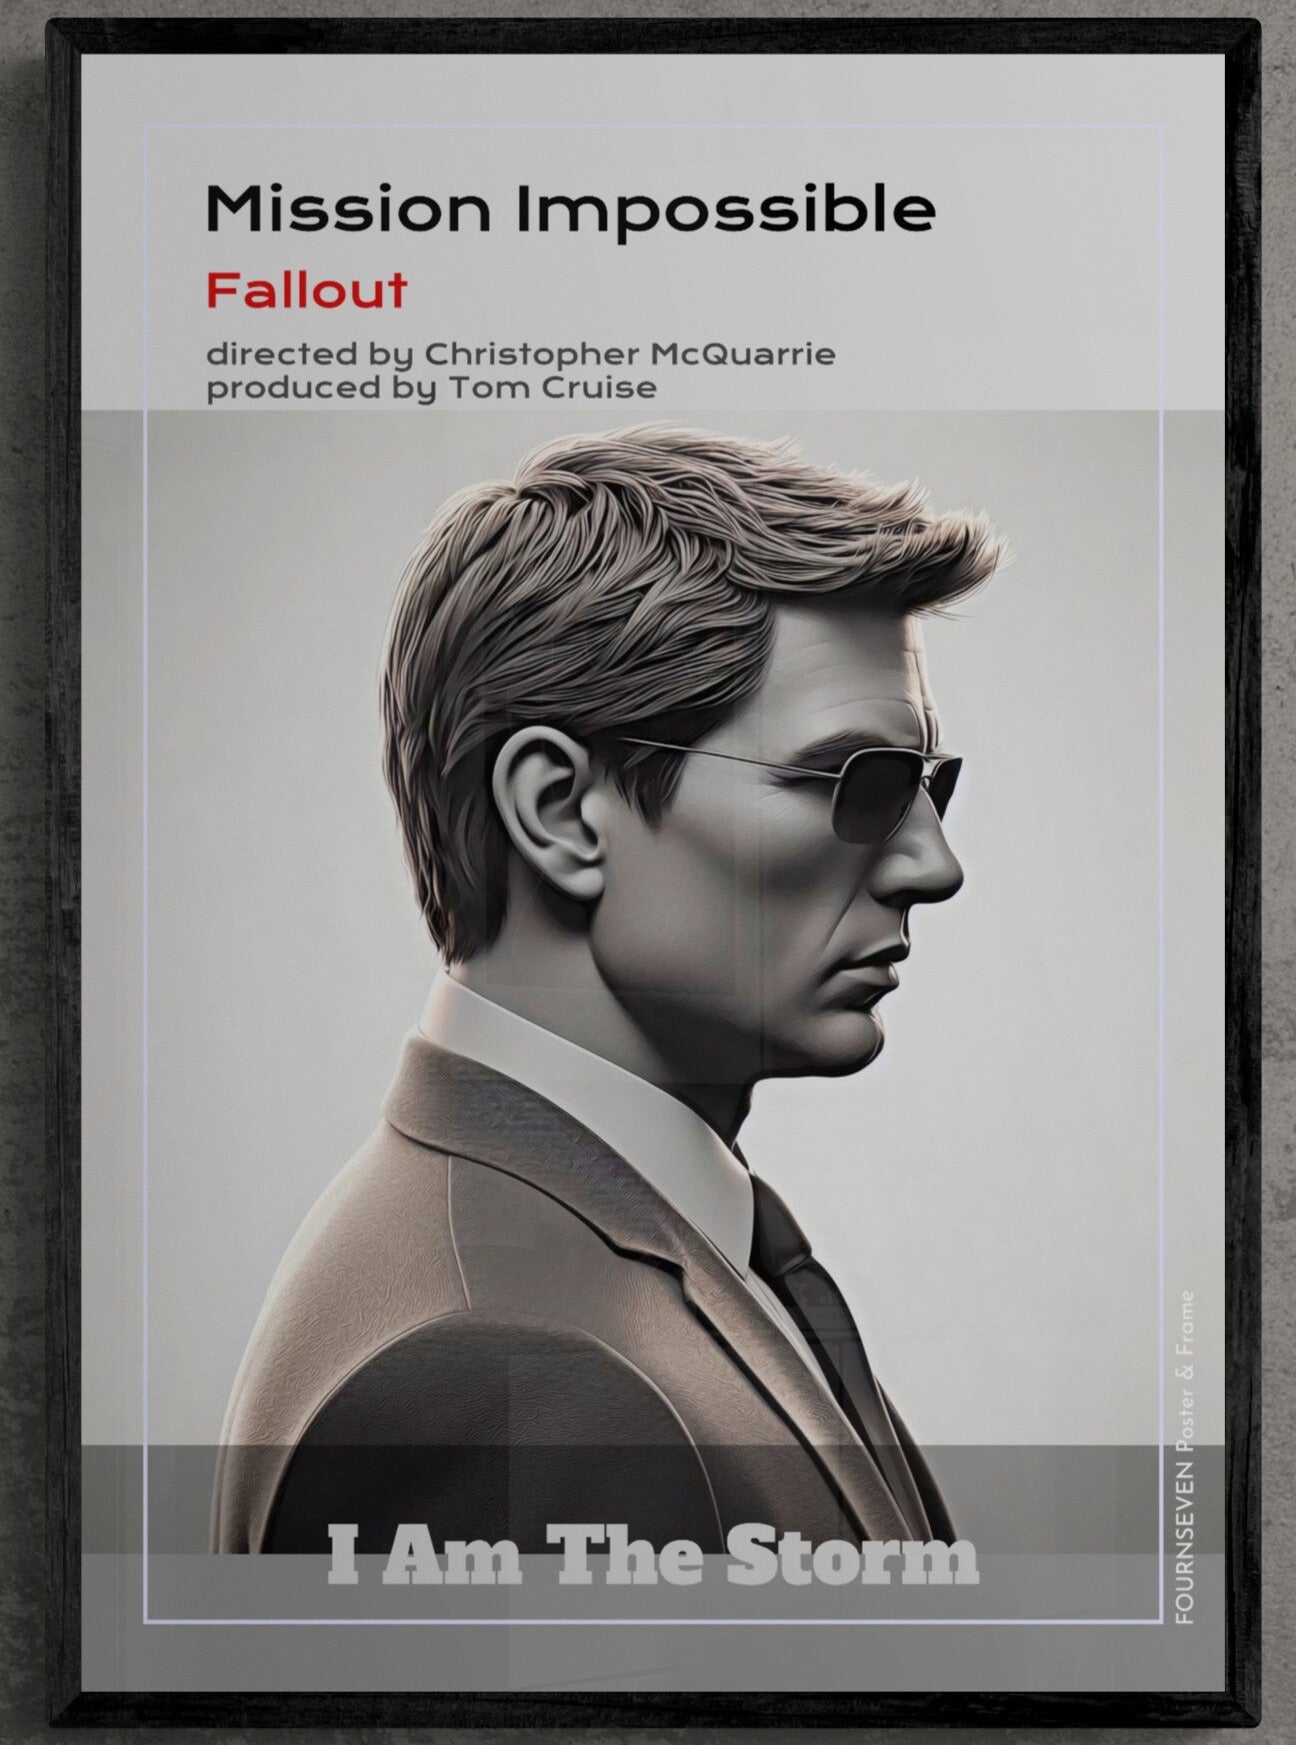 Mission Impossible Fallout film poster.